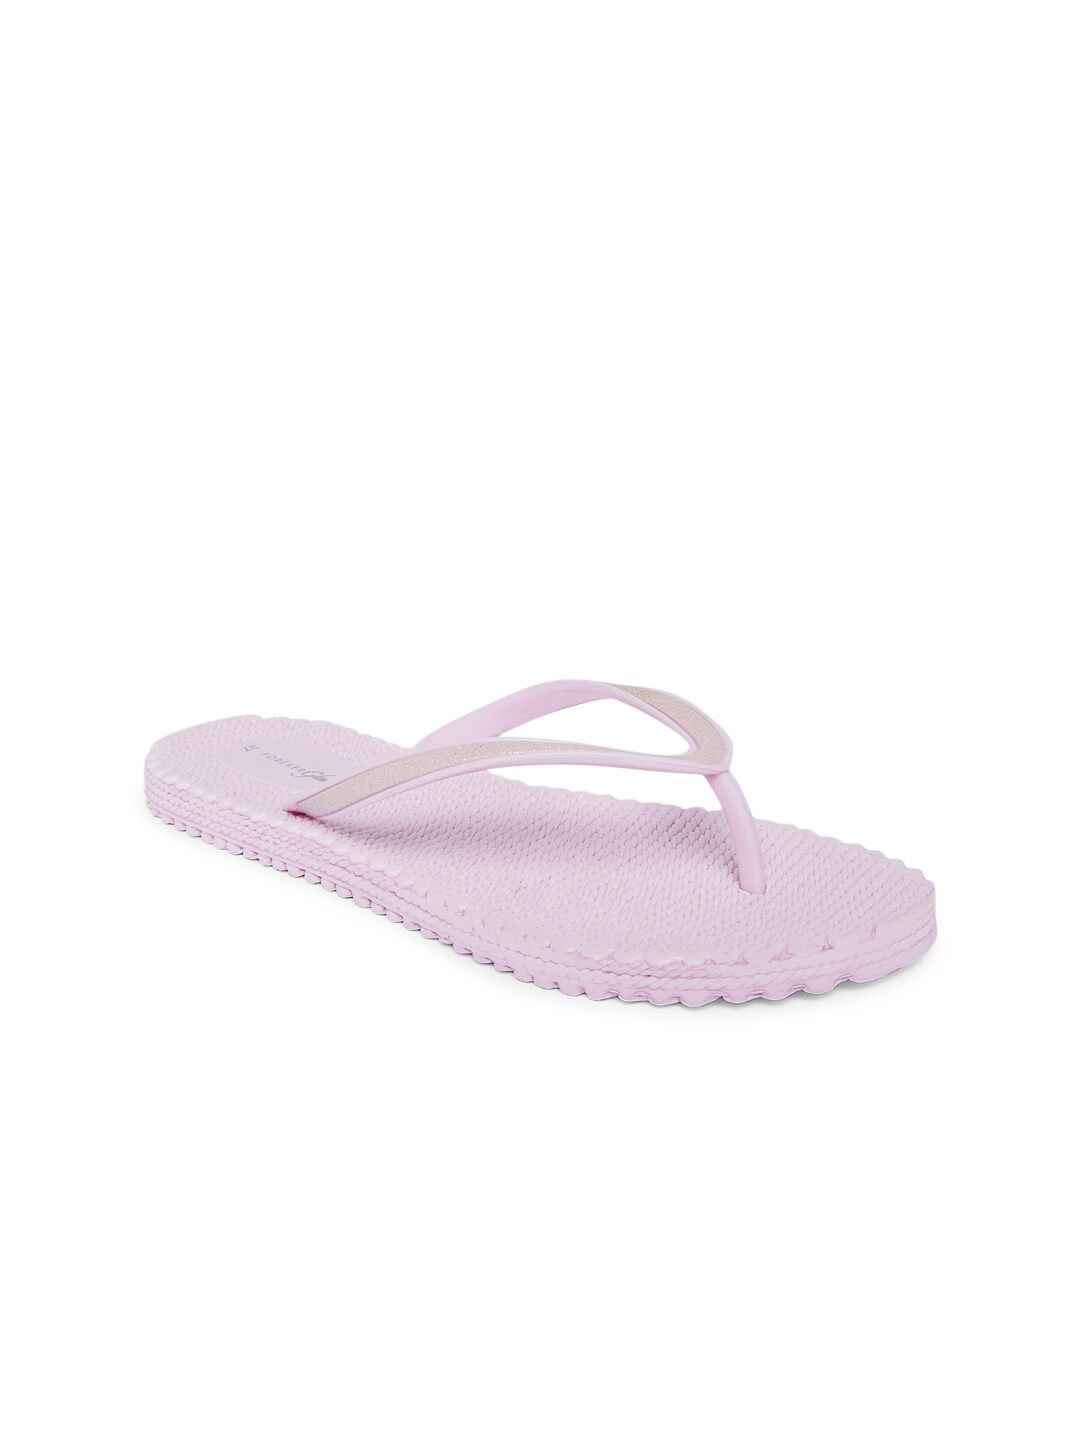 Forever Glam by Pantaloons Women Purple Embellished Thong Flip-Flops Price in India